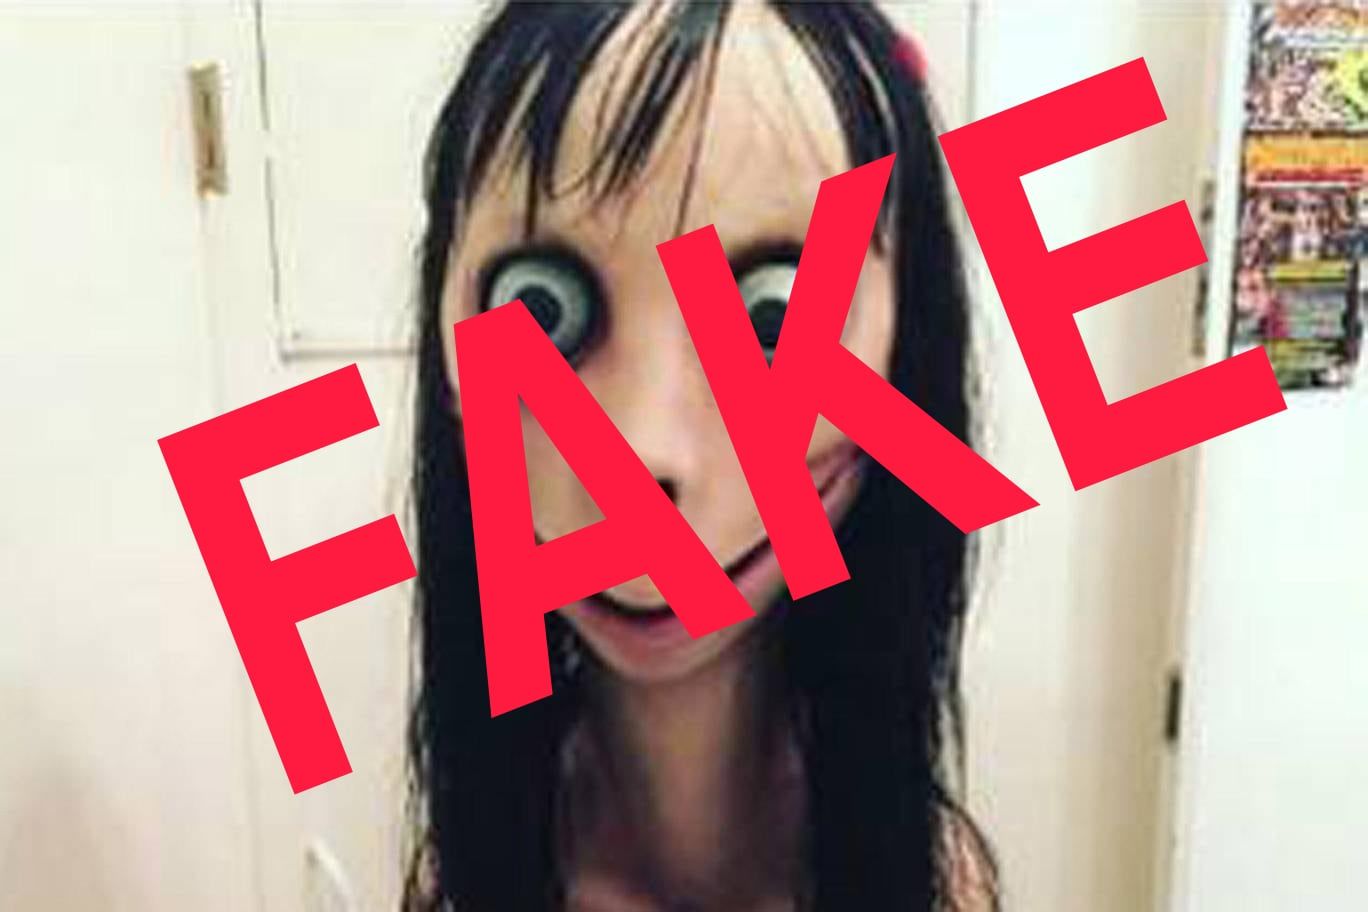 The Momo Challenge: a press-driven panic over a non-existent threat